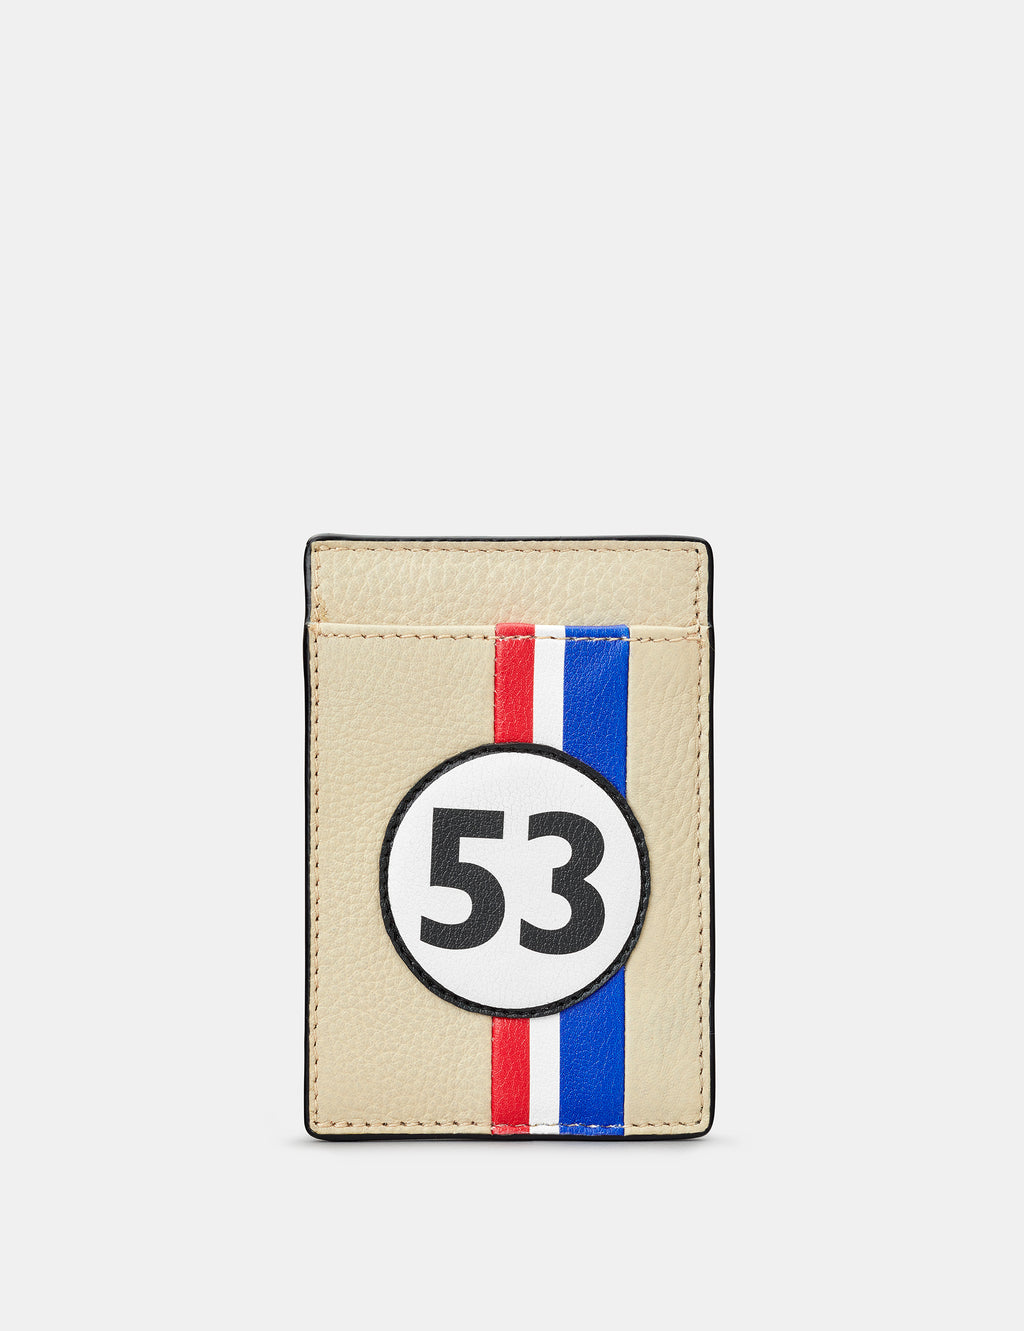 Car Livery No. 53 Compact Leather Card Holder